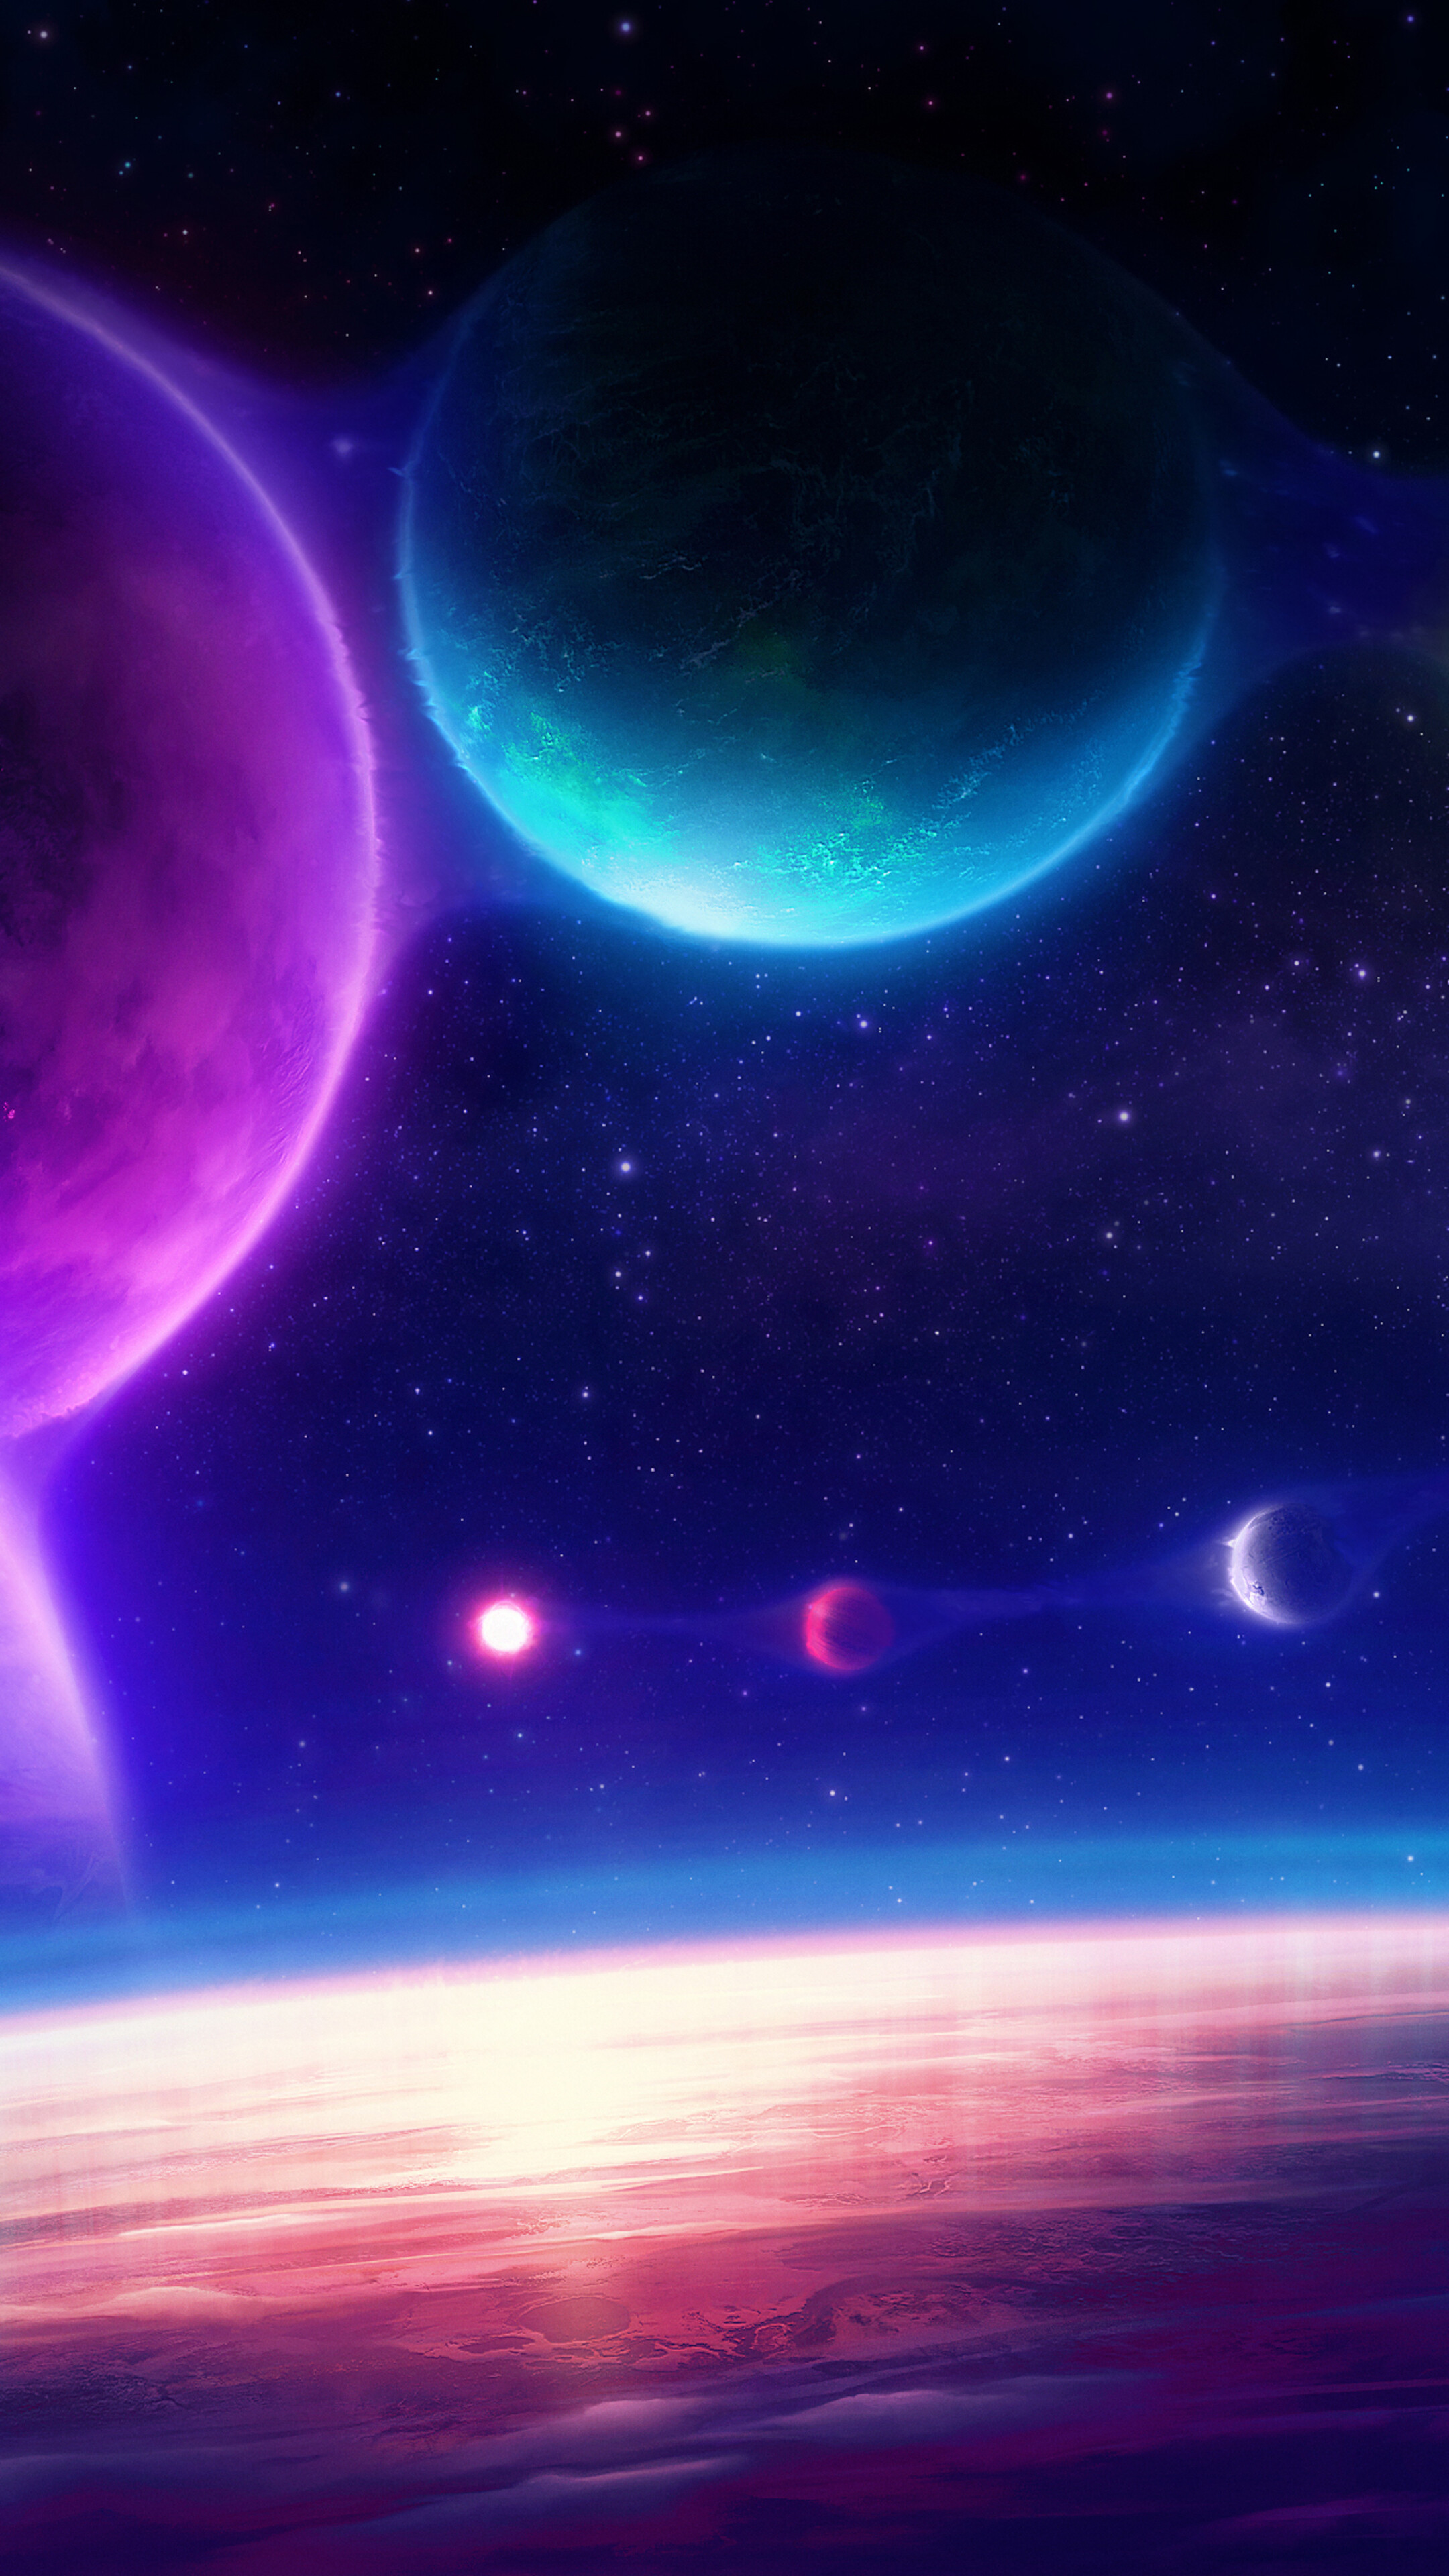 Colorful, Planets, Space, Digital Art, 4K phone HD Wallpaper, Image, Background, Photo and Picture. Mocah HD Wallpaper